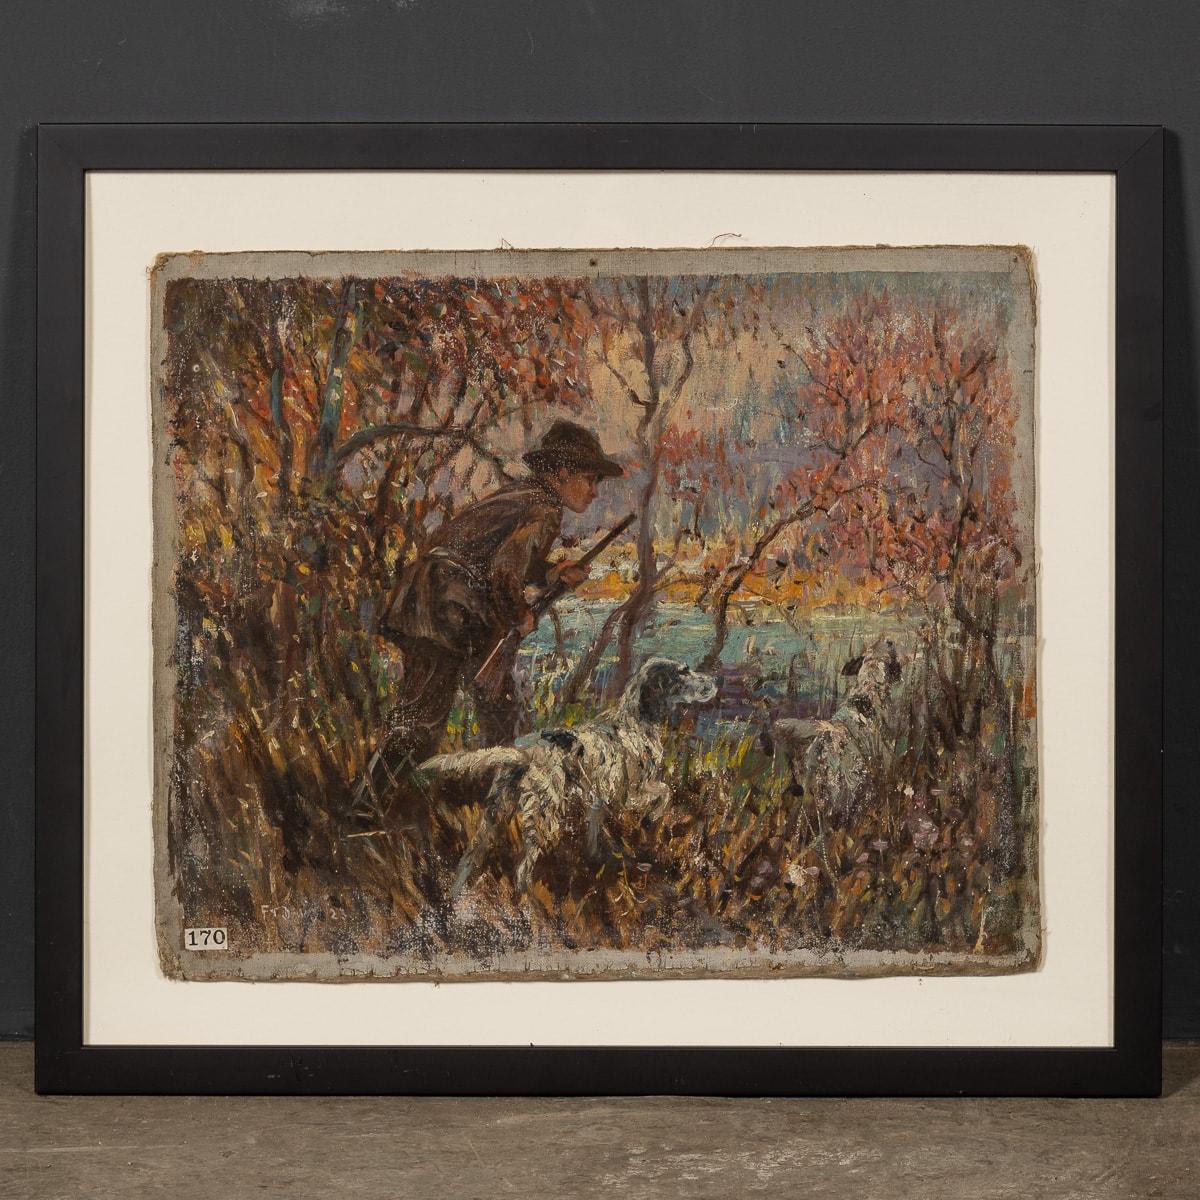 An antique 20th Century oil on canvas piece by Frederick Thomas Daws portraying a hunting scene. In the painting, a gentleman is seen holding his shotgun alongside his pair of hunting dogs, crouching in the woodland. Daws, famed for his depictions